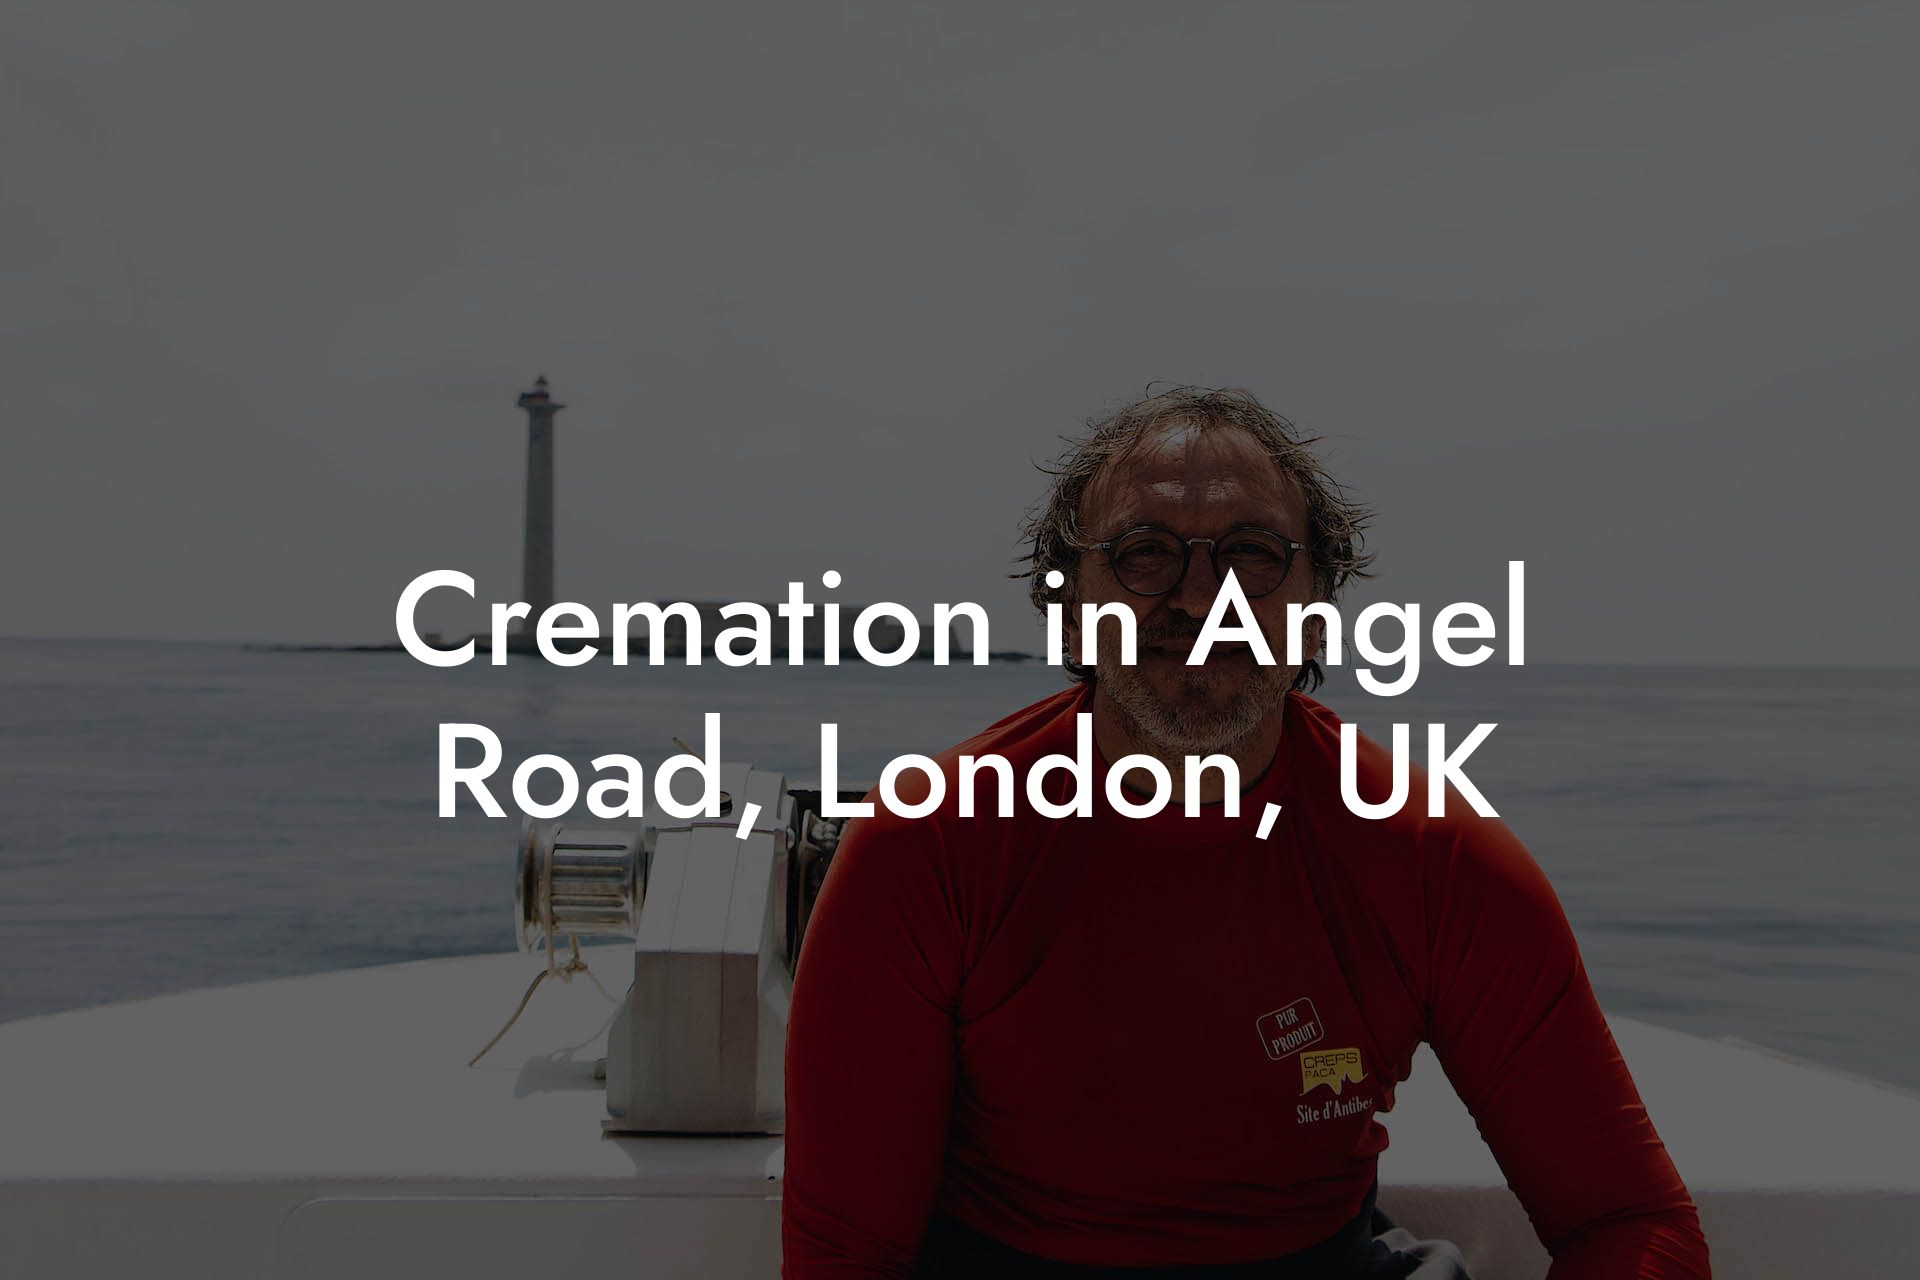 Cremation in Angel Road, London, UK